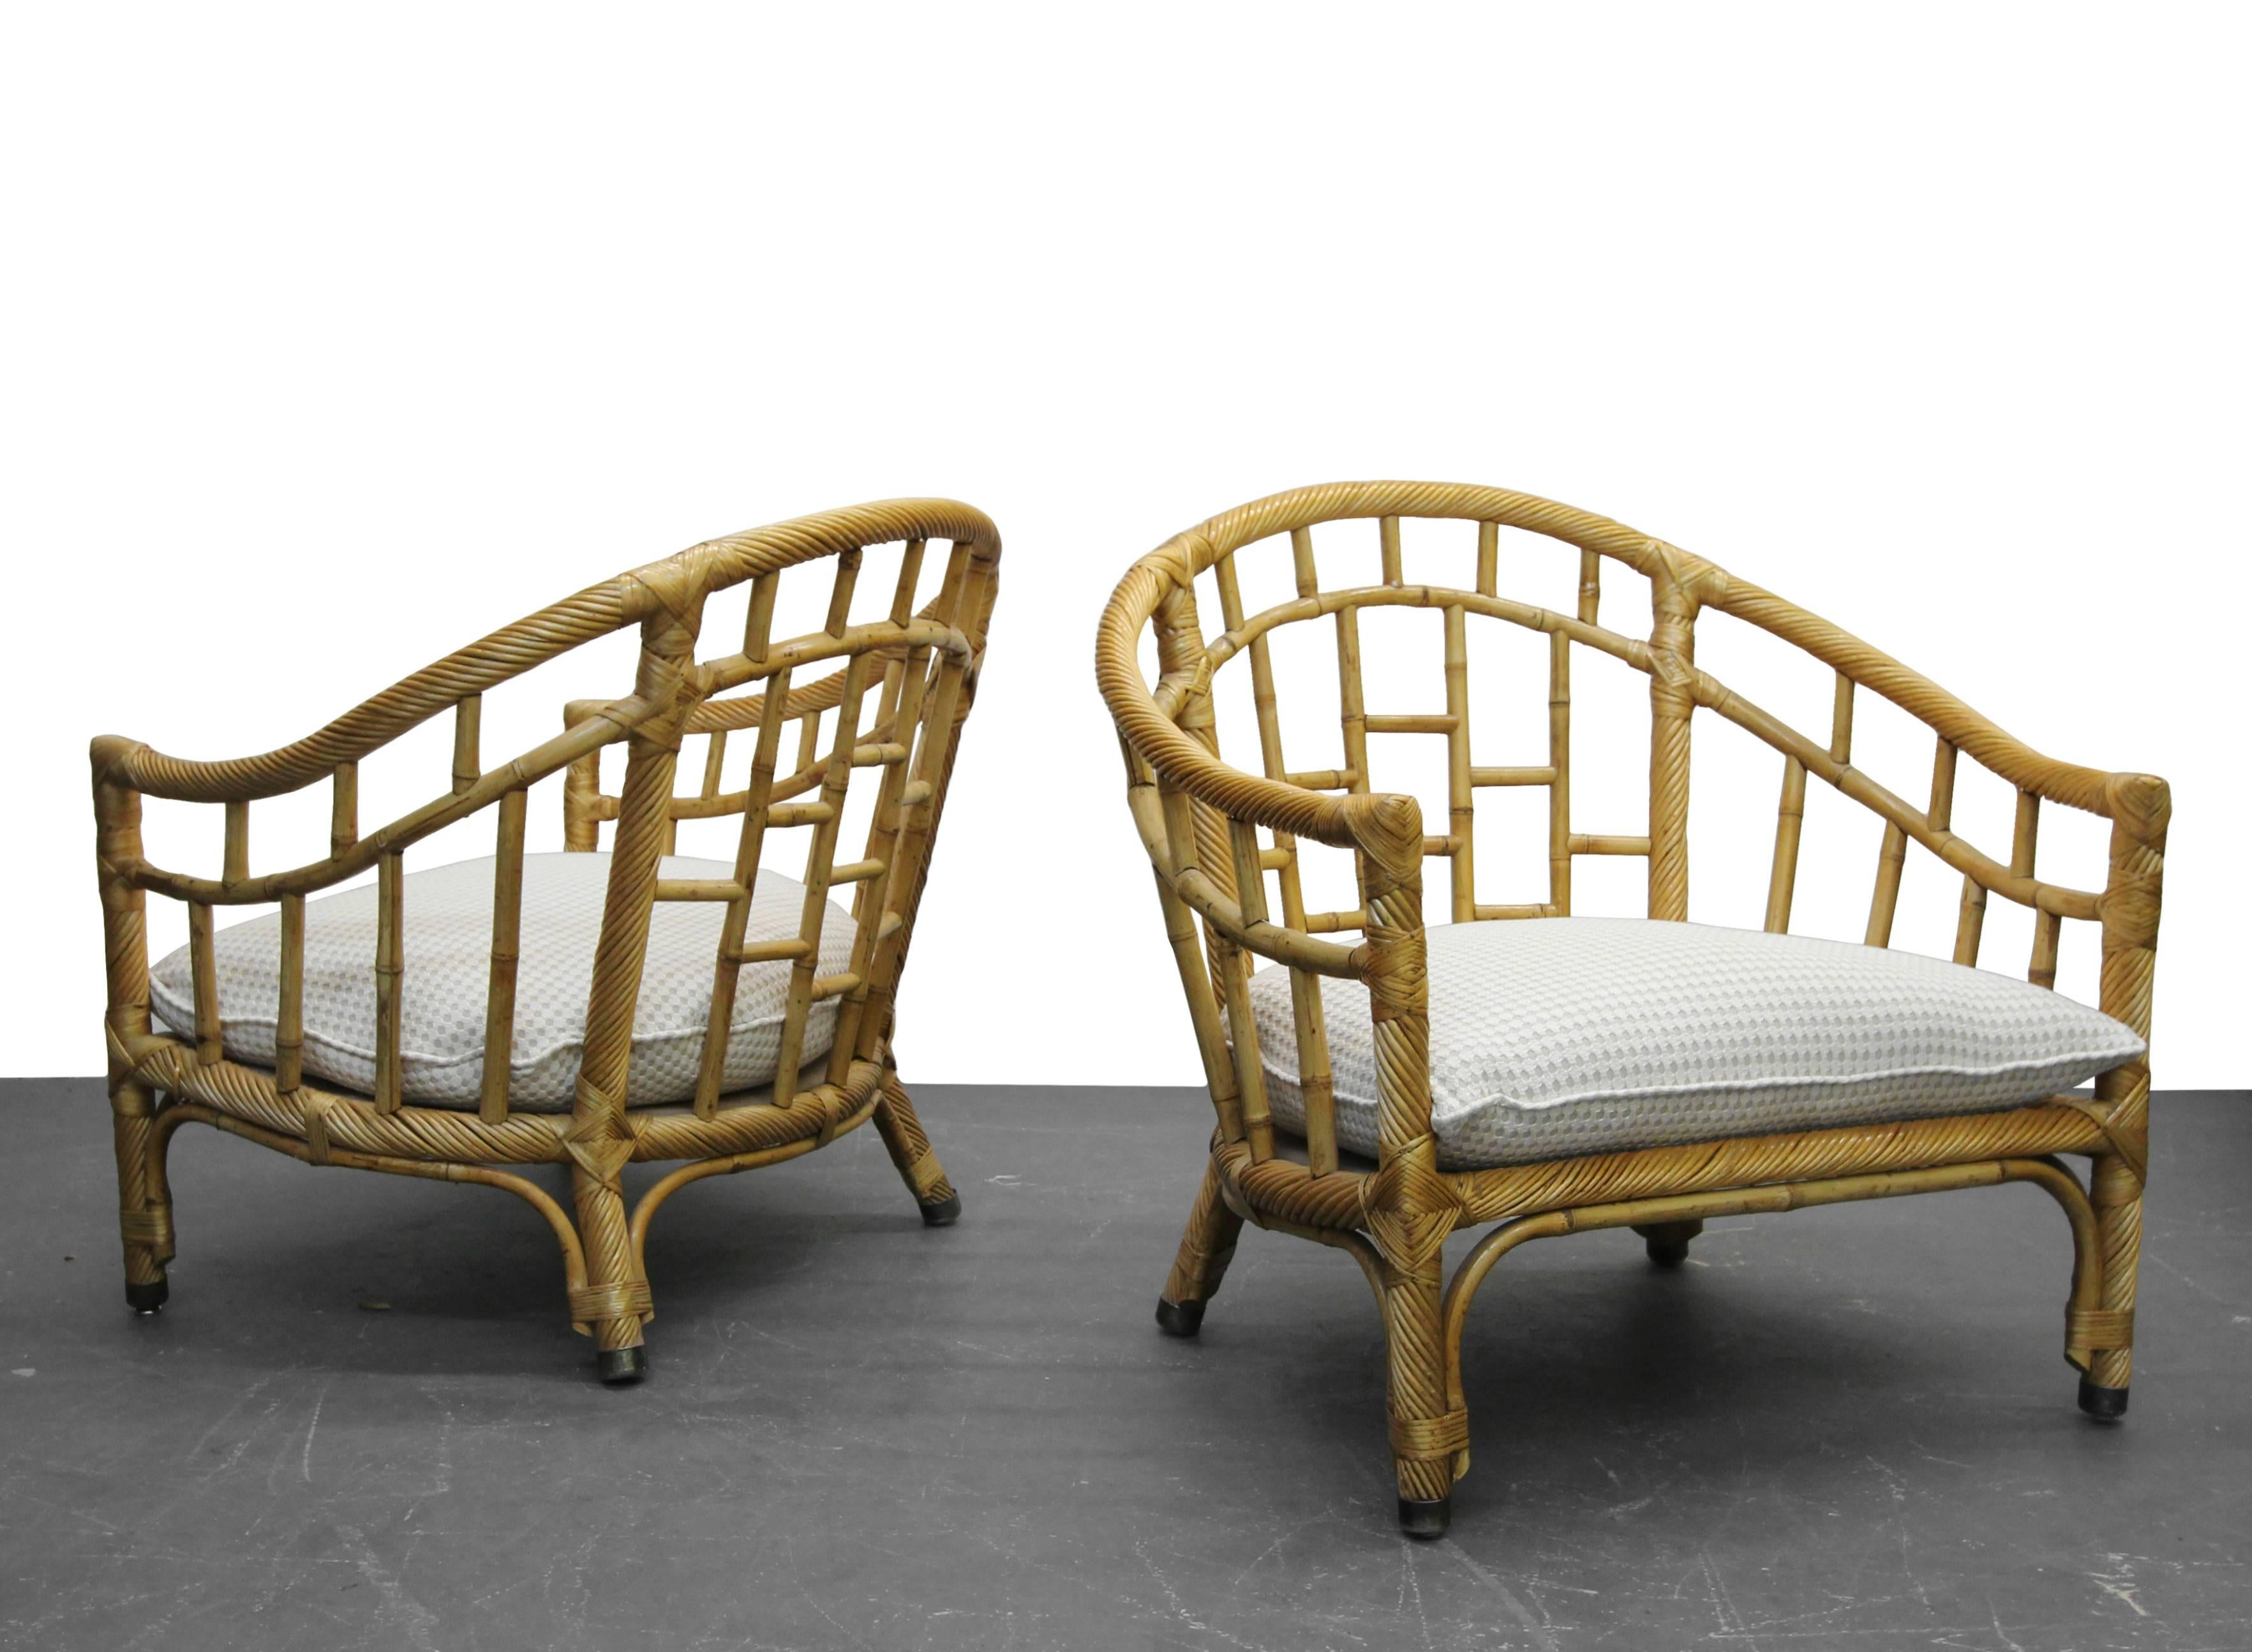 Rare oversized pair of barrel back bamboo lounge chairs. Perfect chairs for a Bohemian or eclectic decor. Would make perfect sun room or reading room chairs.

Bamboo and rattan is in excellent condition. Chair has all new strapping and down filled